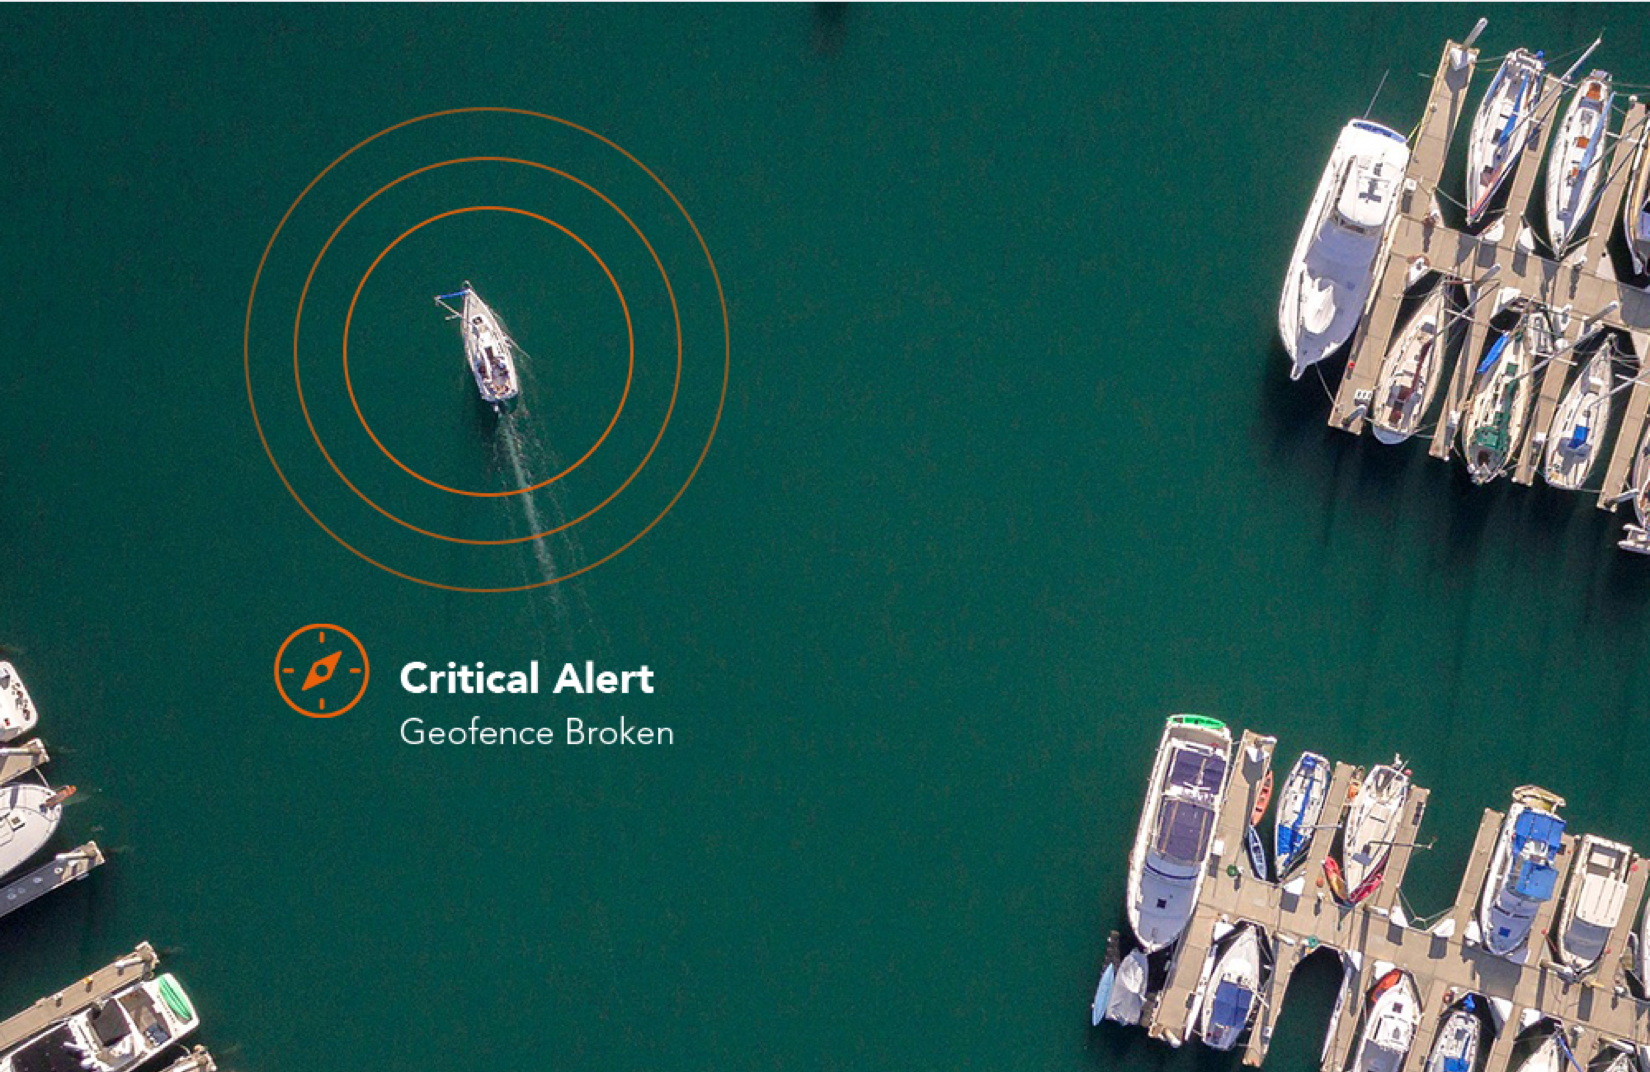 Set custom geofences and receive critical alerts with the Siren app